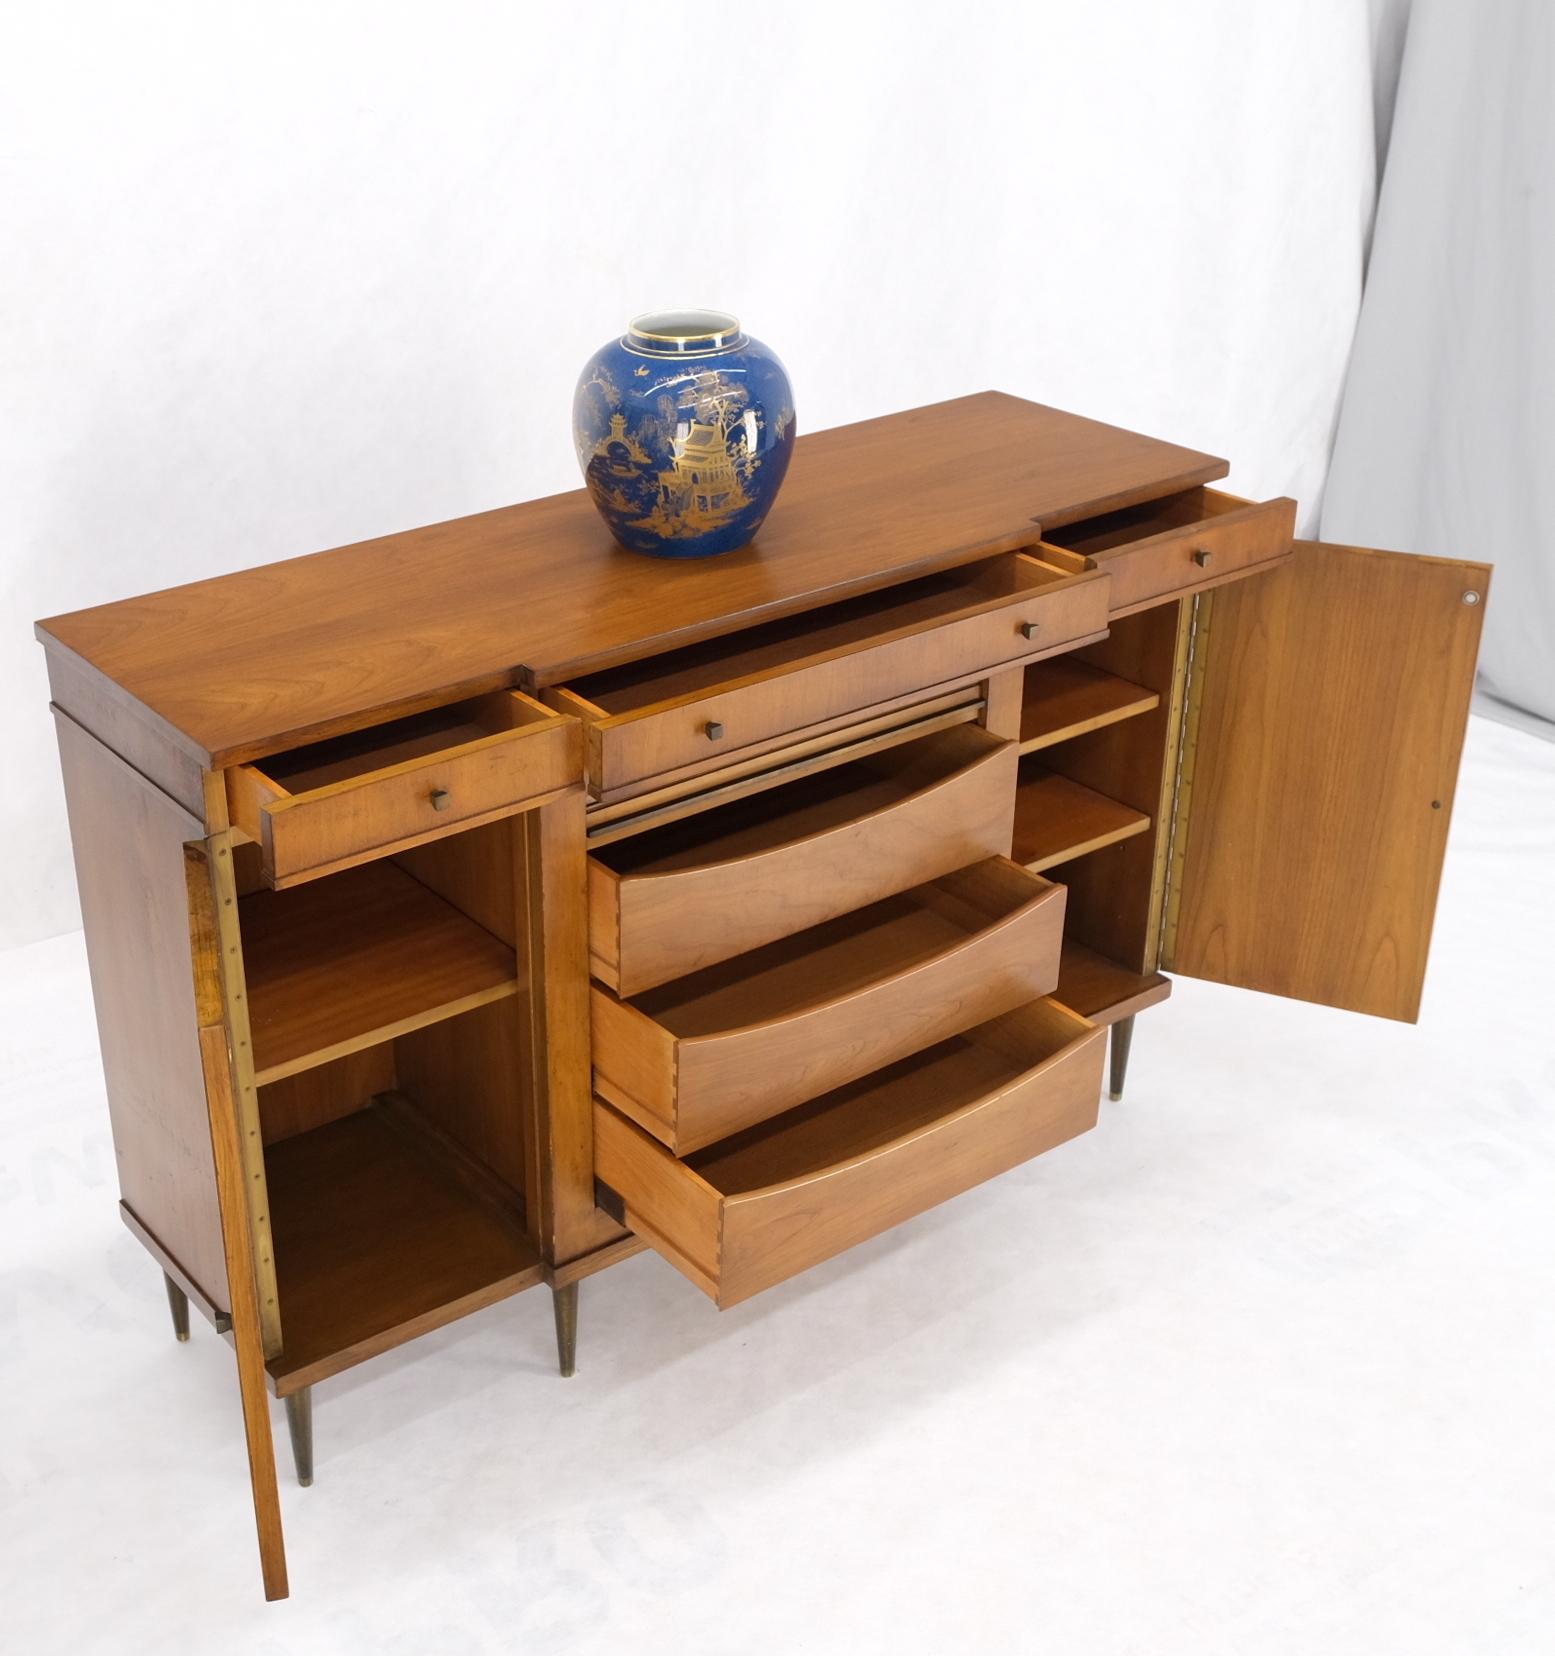 Widdicomb tambour doors compartment console server credenza cabinet sideboard on brass cone shape legs.